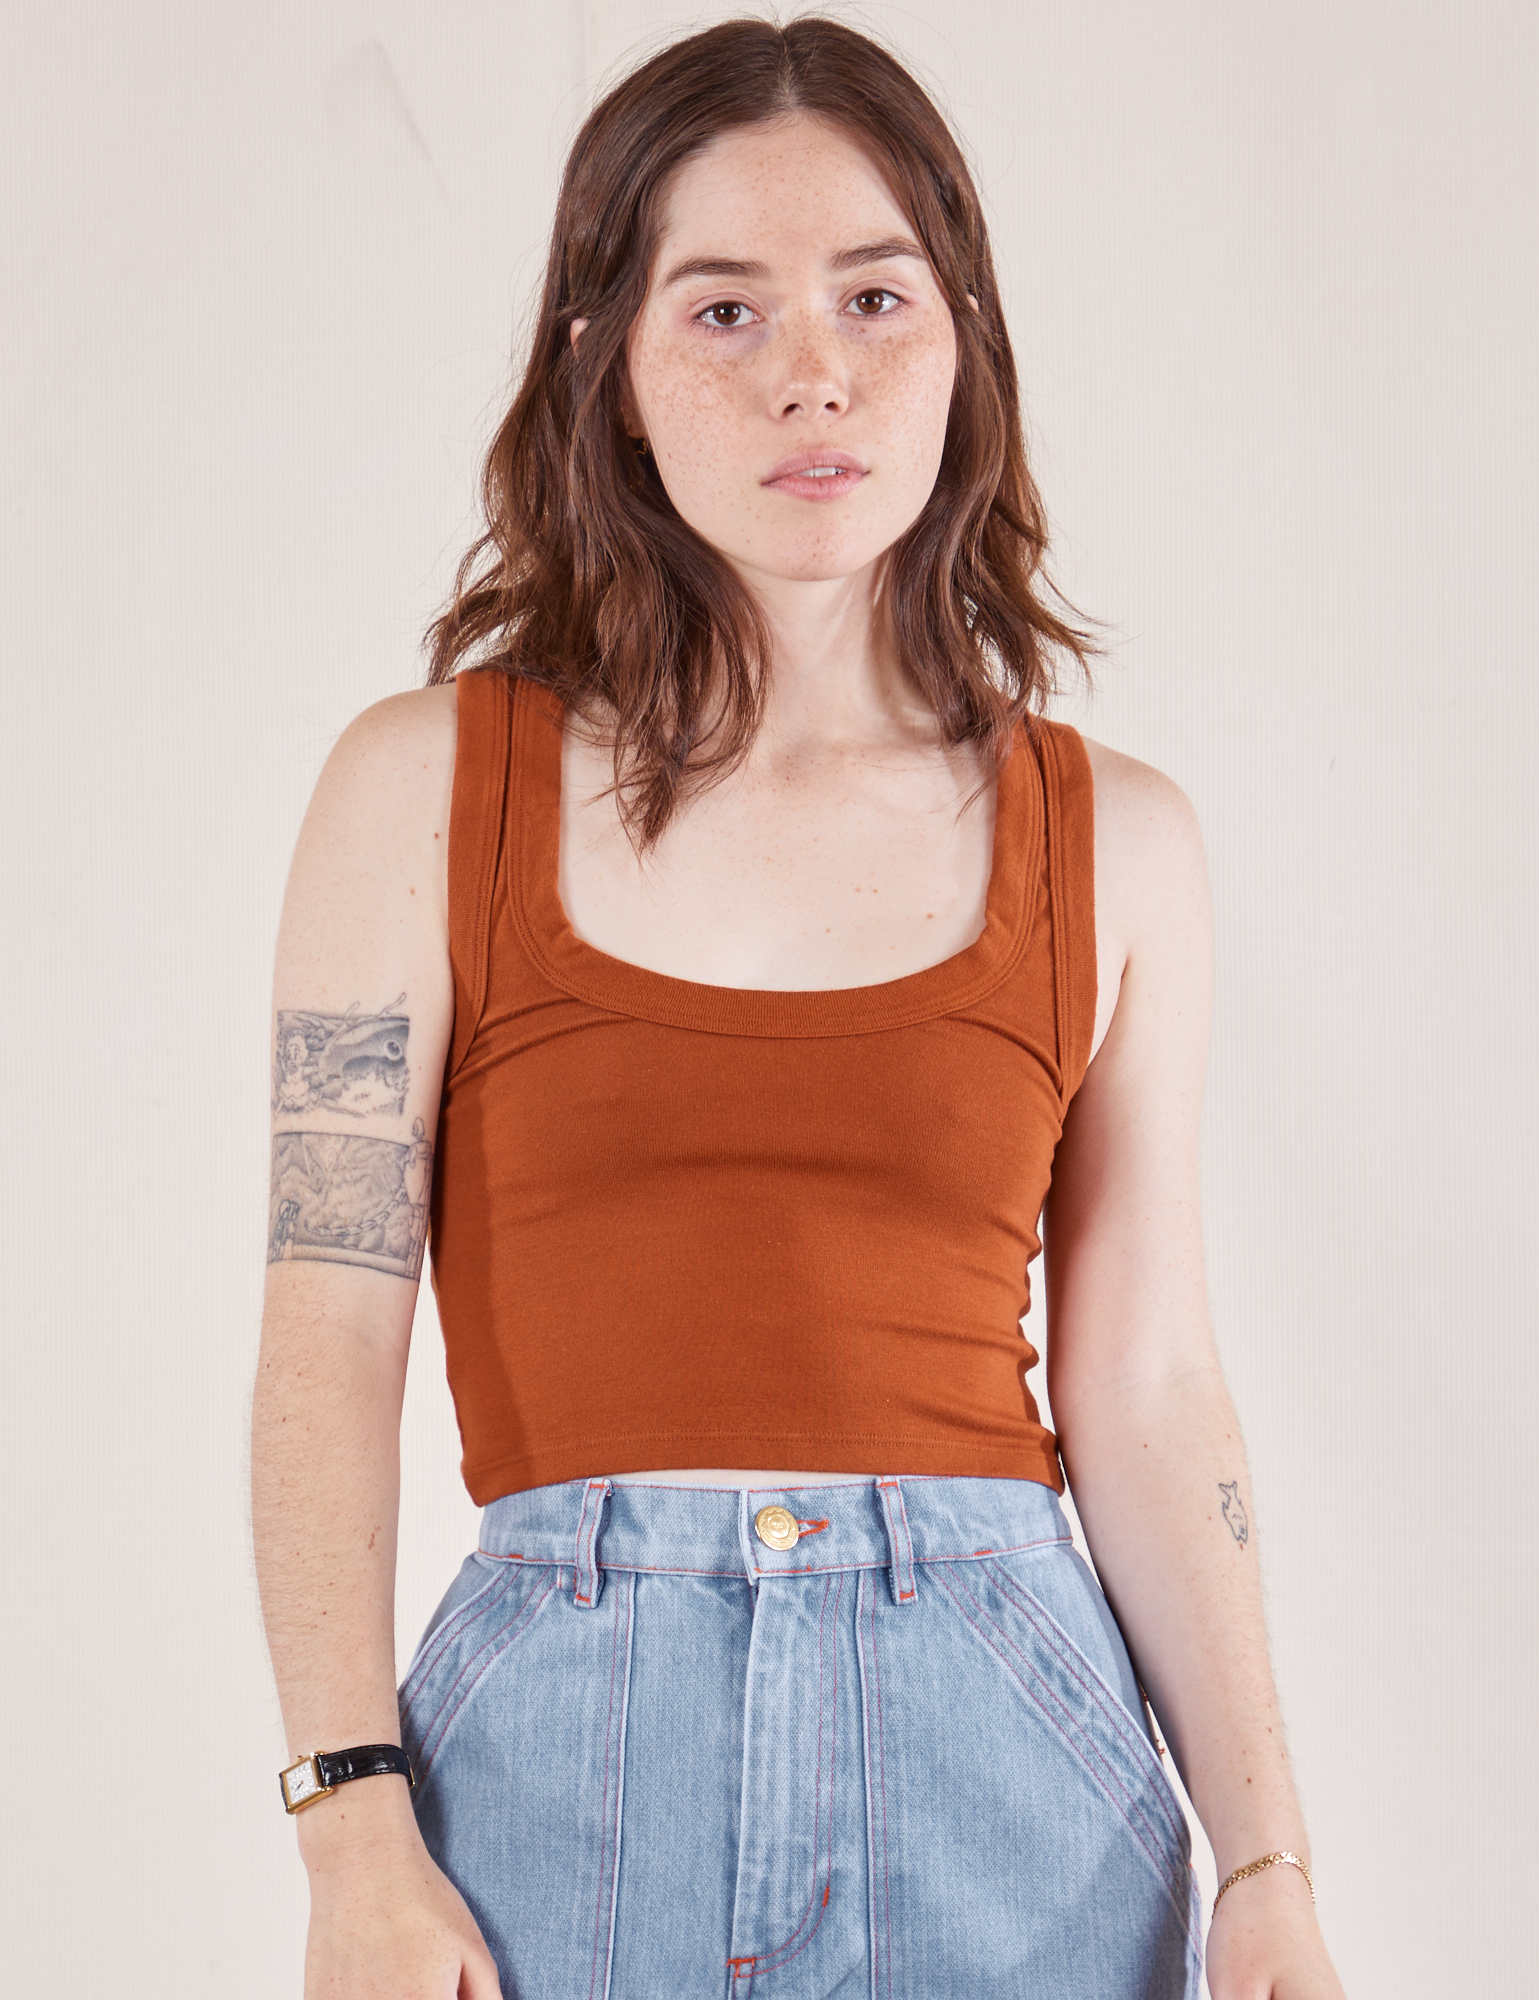 Hana is 5'3" and wearing P Cropped Tank Top in Burnt Terracotta